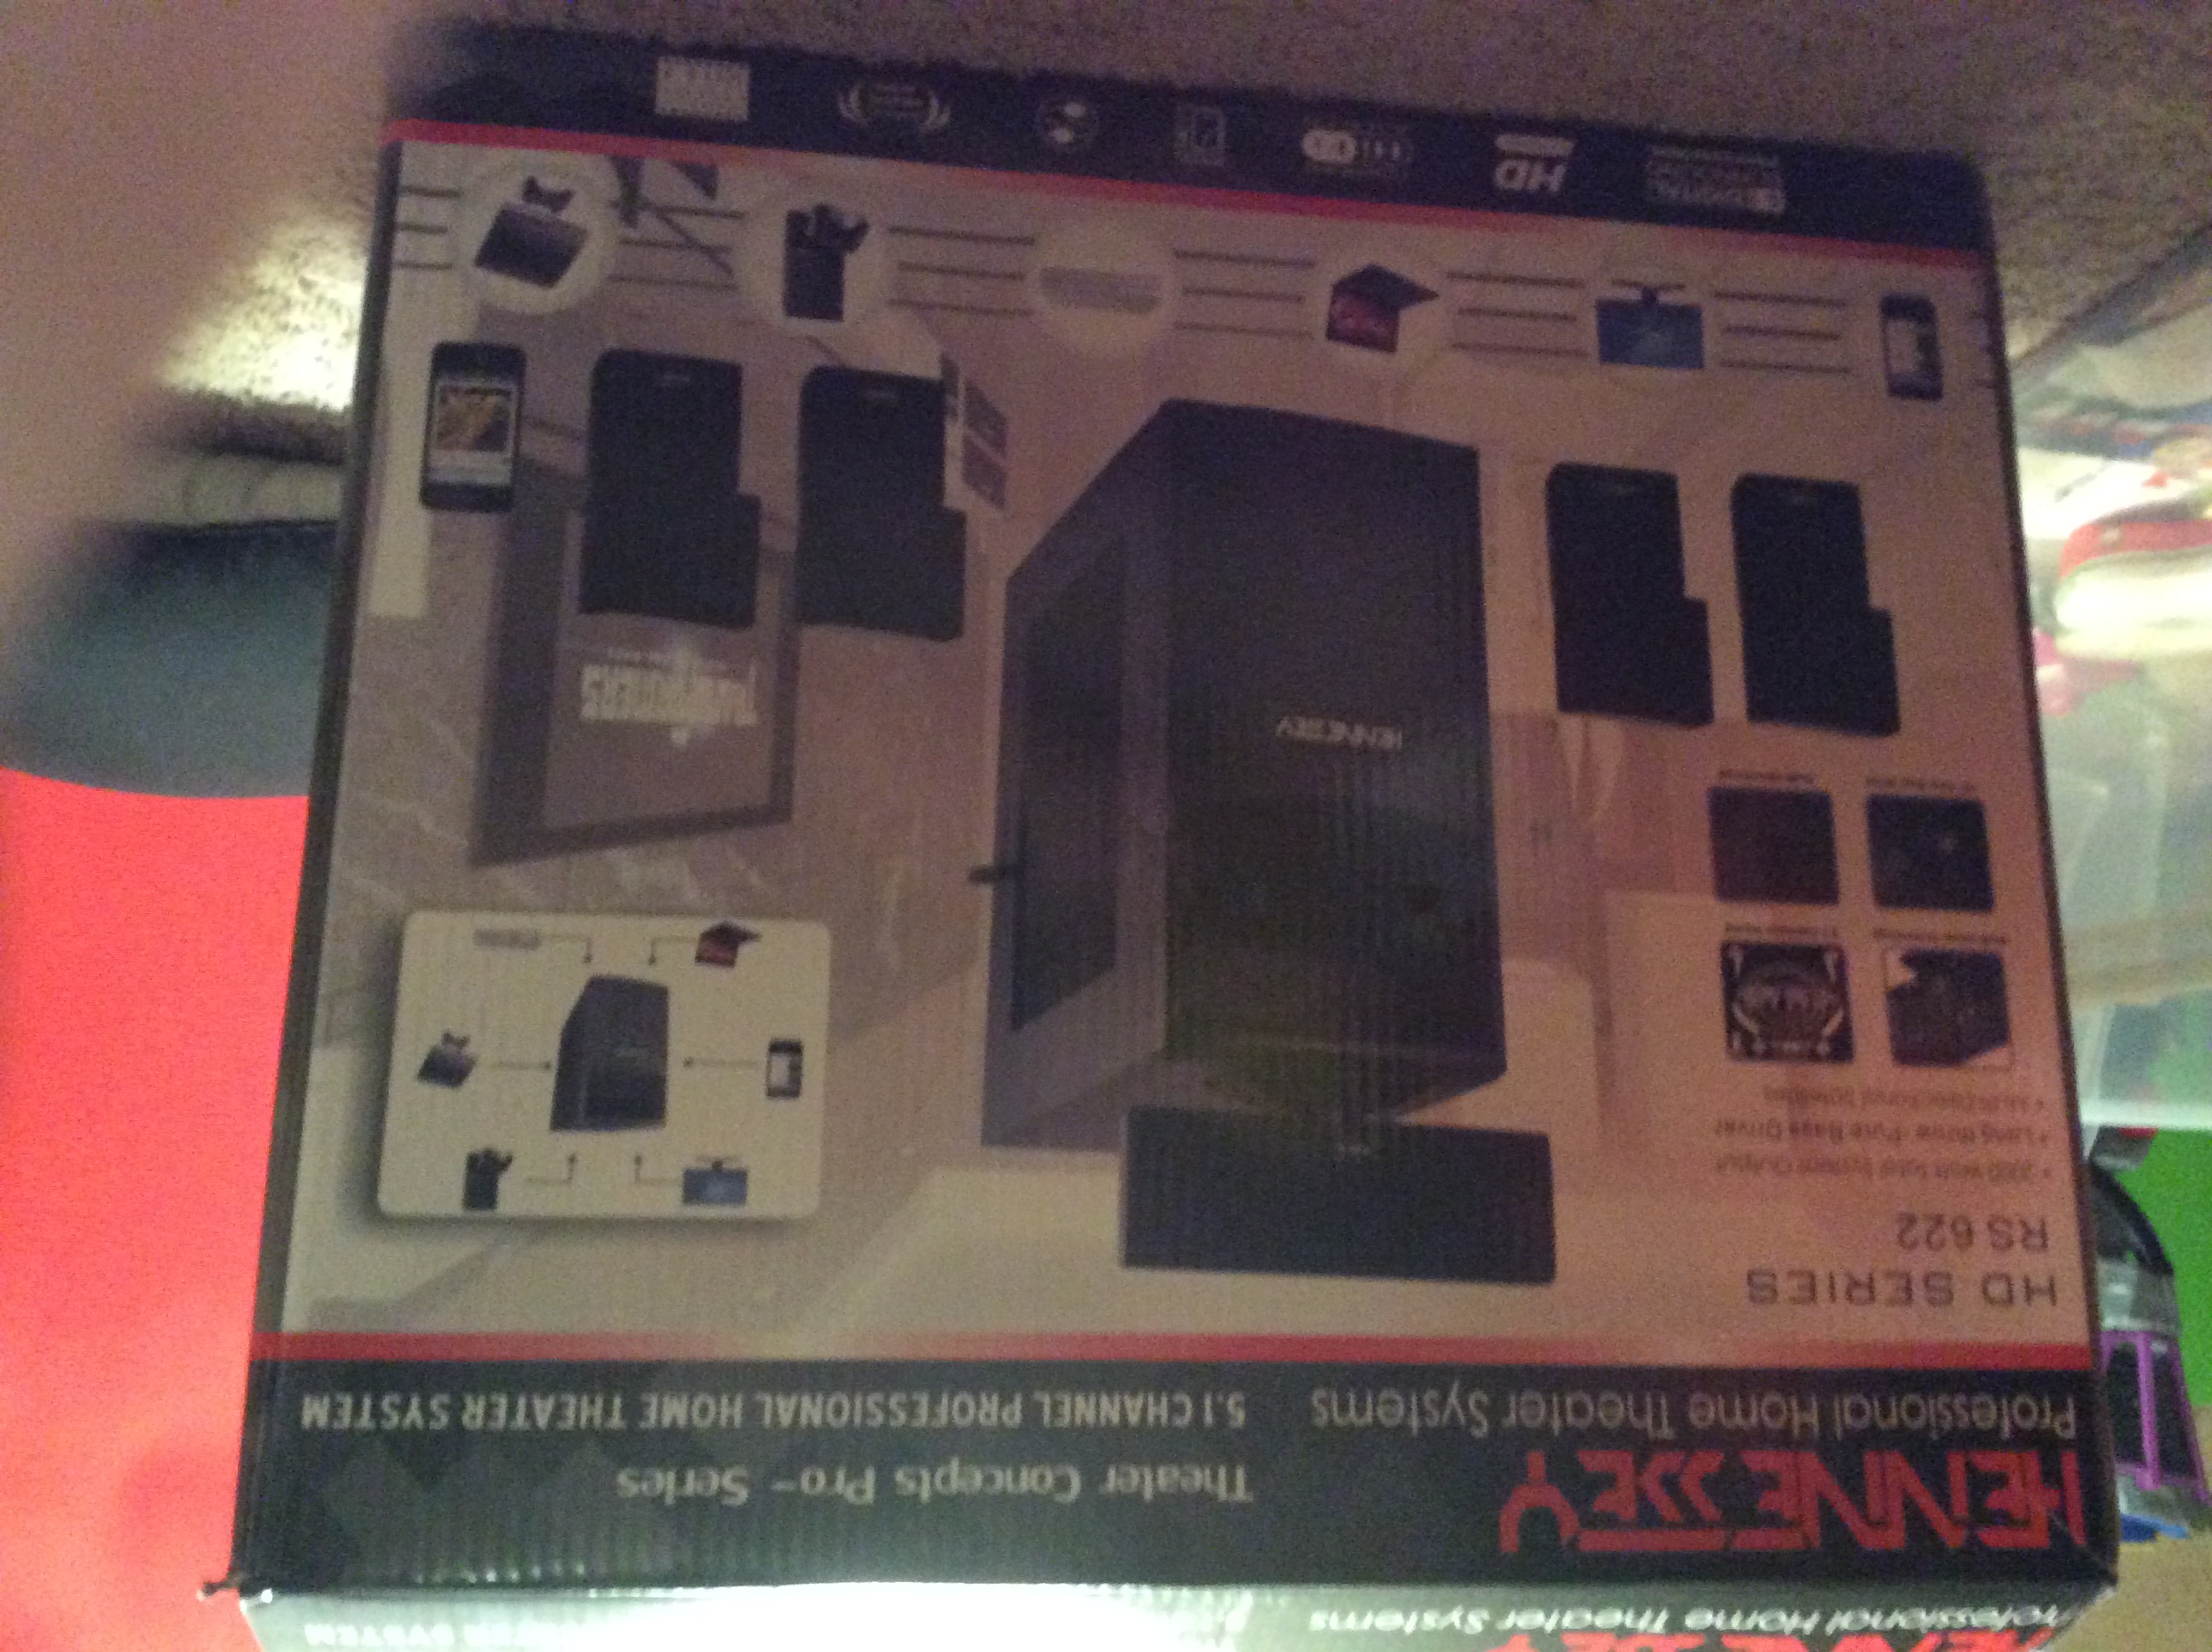 Picture of the box that contains equipment